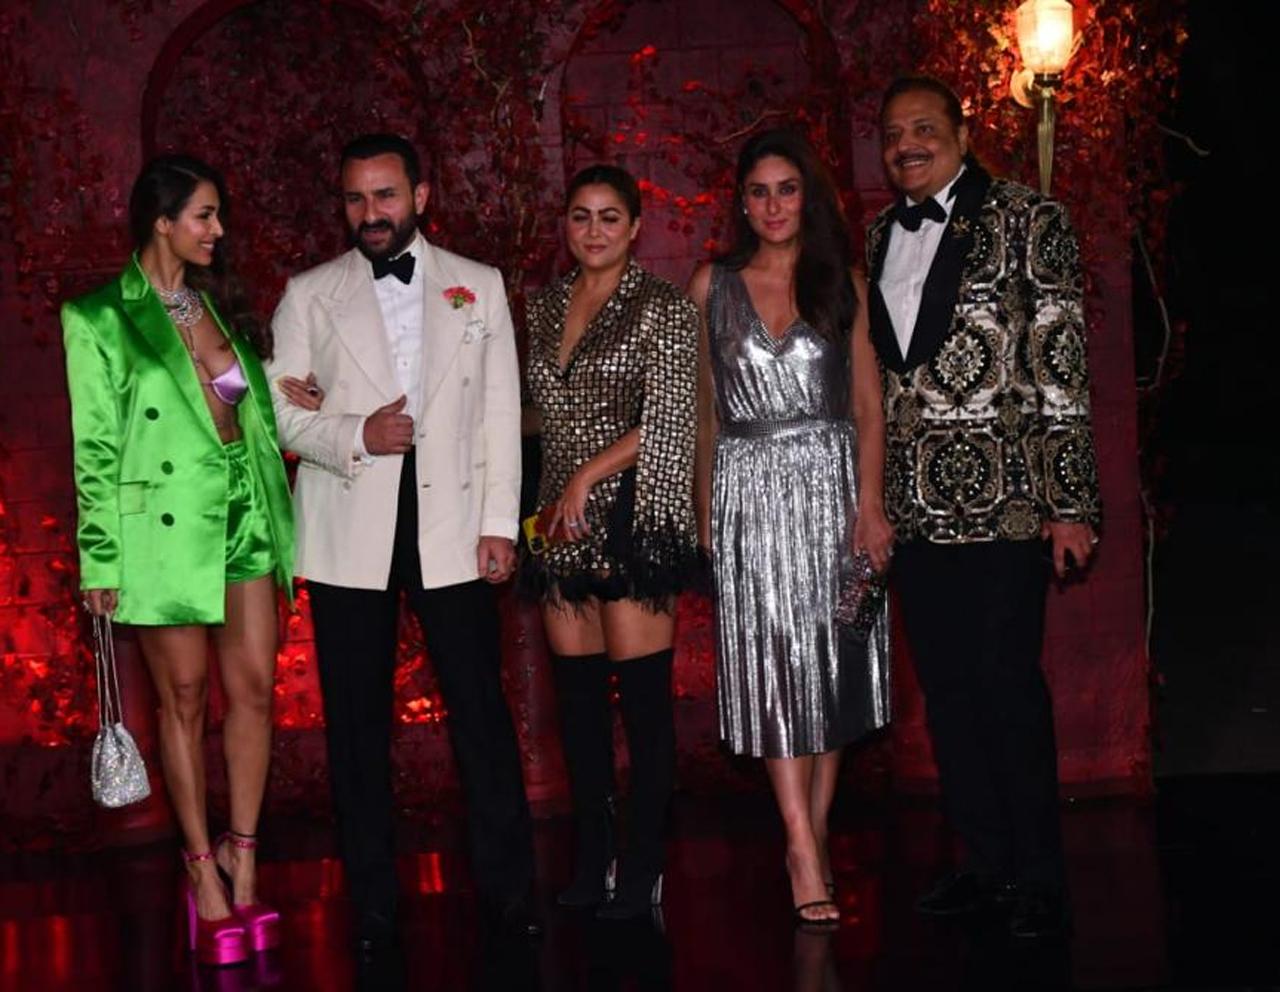 Family comes first! Half of Bollywood’s glamour and glitz lie in this picture alone. Malaika Arora shines in a green and pink dress, Saif Ali Khan looks dapper in a white suit, and Kareena Kapoor Khan oozes oomph in a silver dress that makes her look perfect to the T.